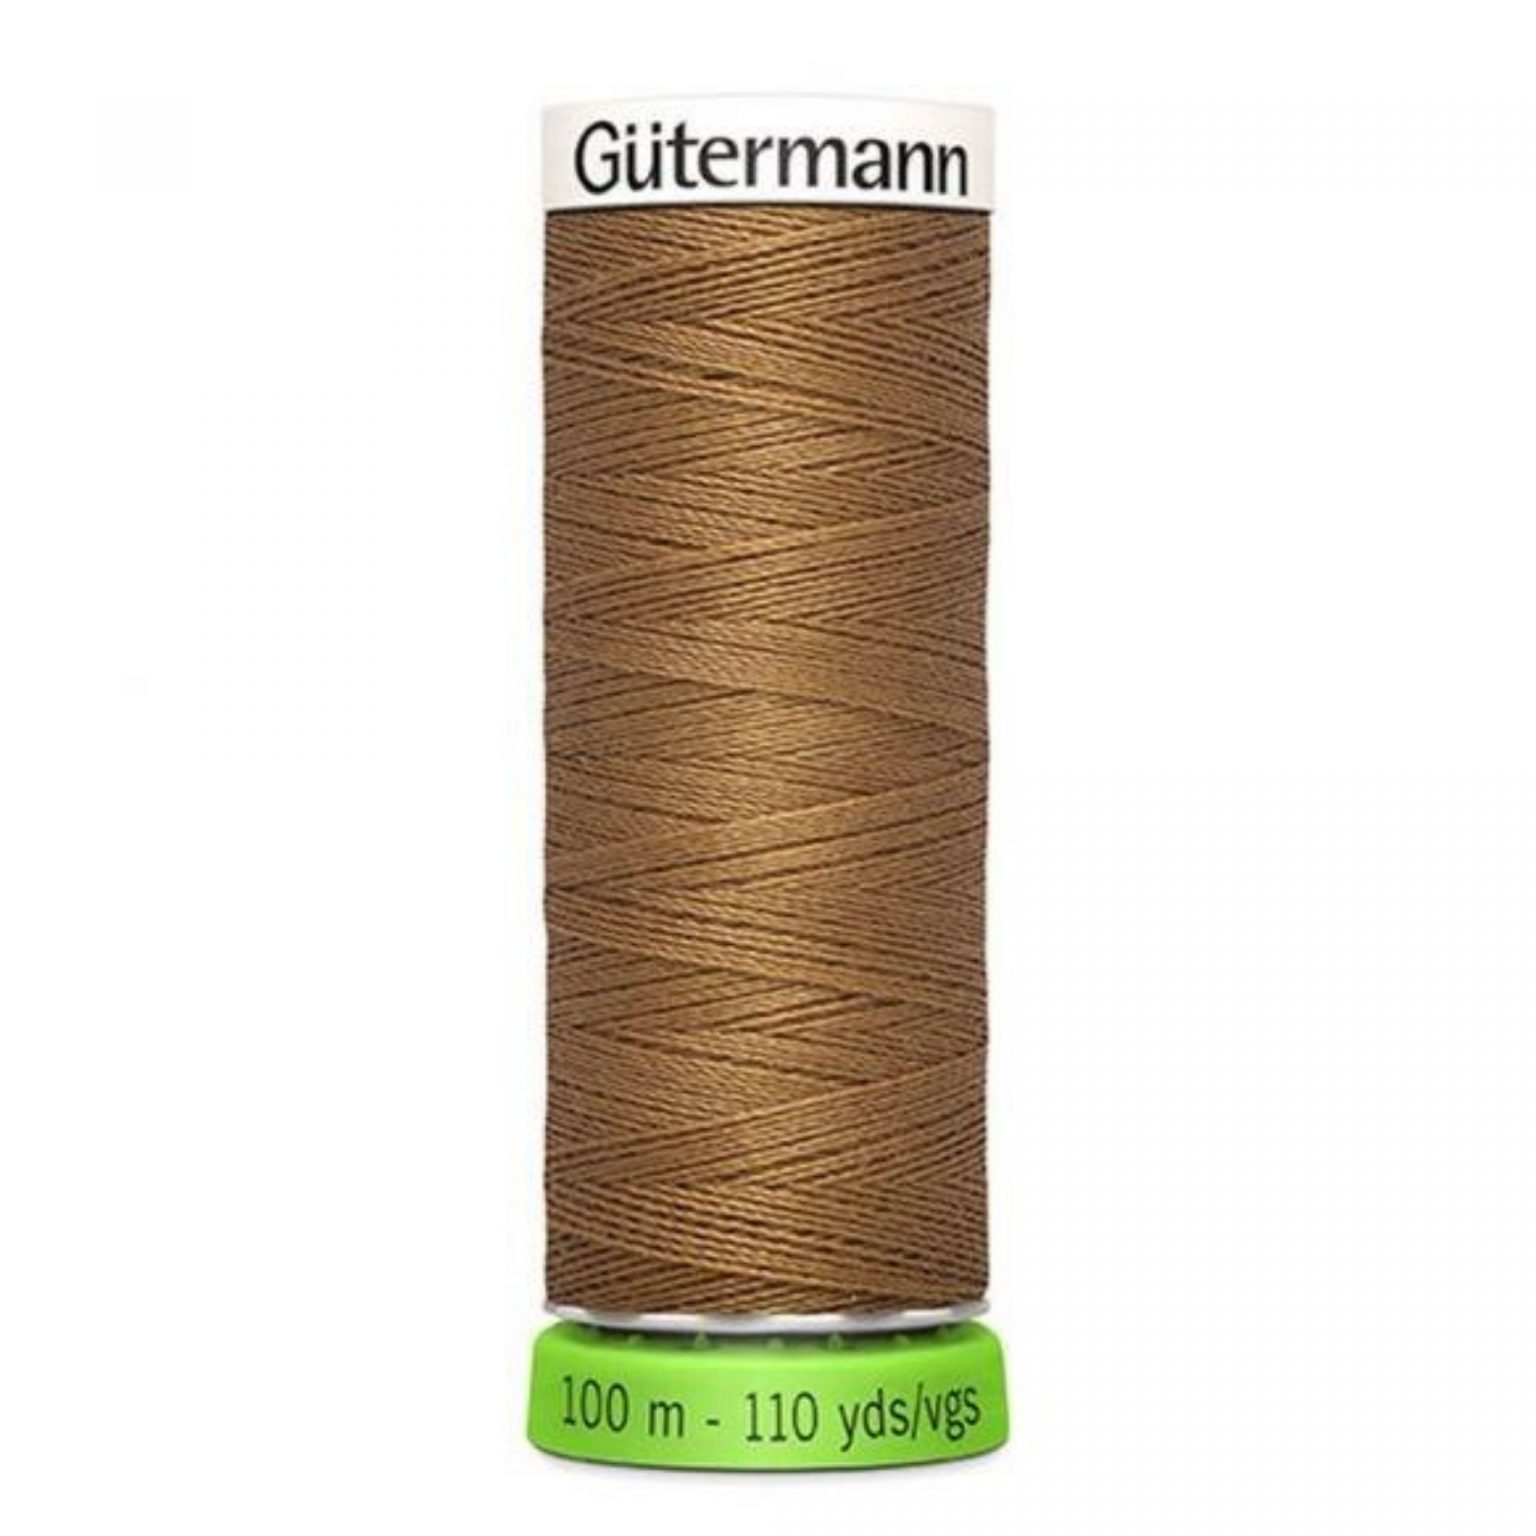 gutermann sewing thread in golden syrup 887